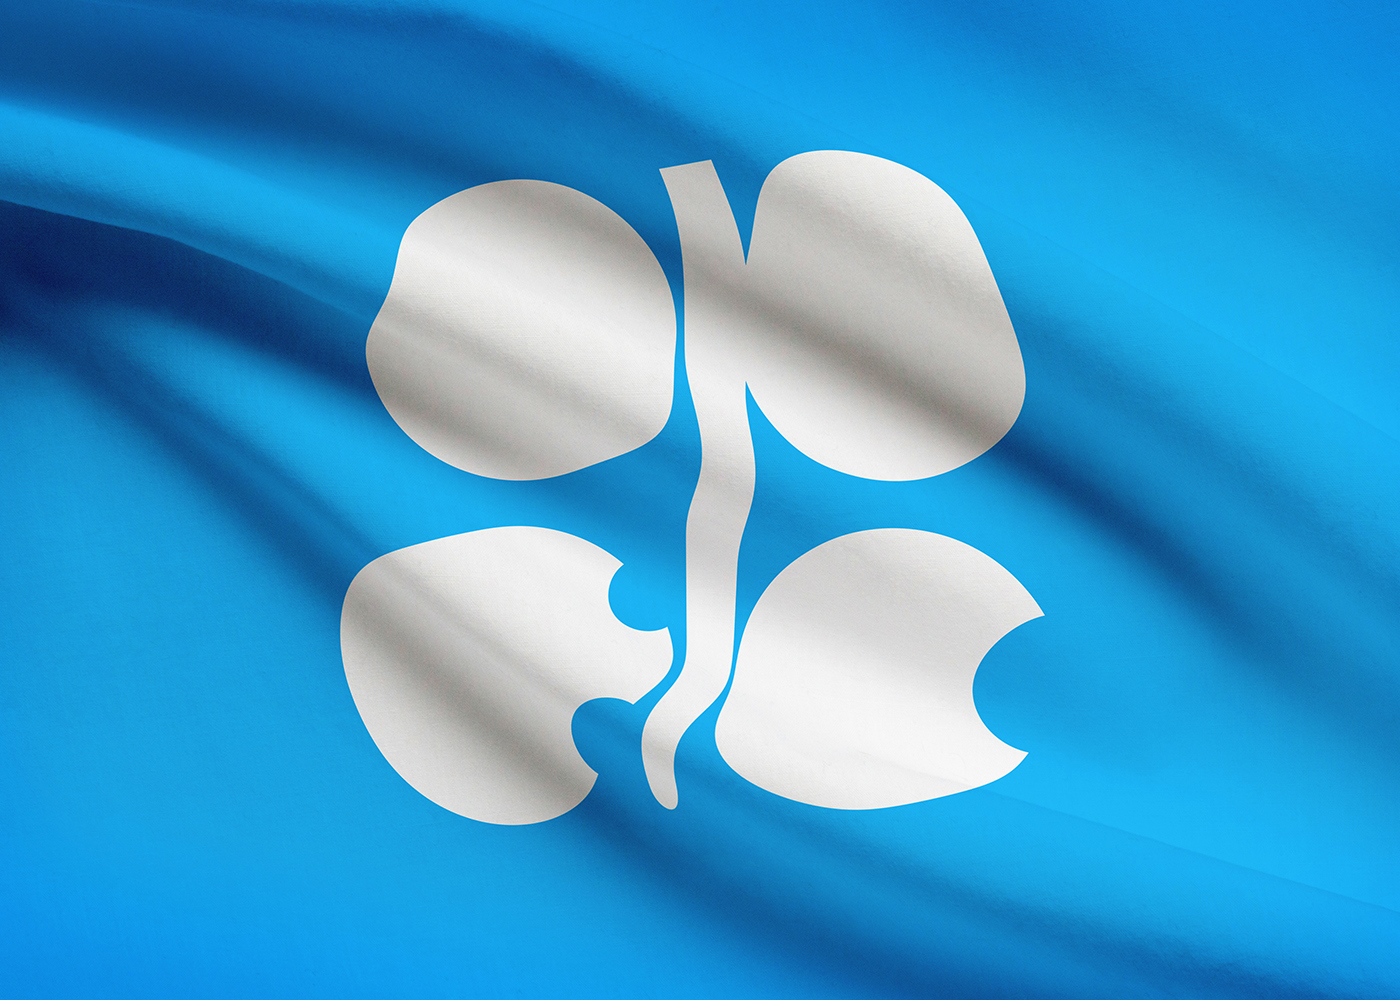 No Changes Planned at OPEC Meeting